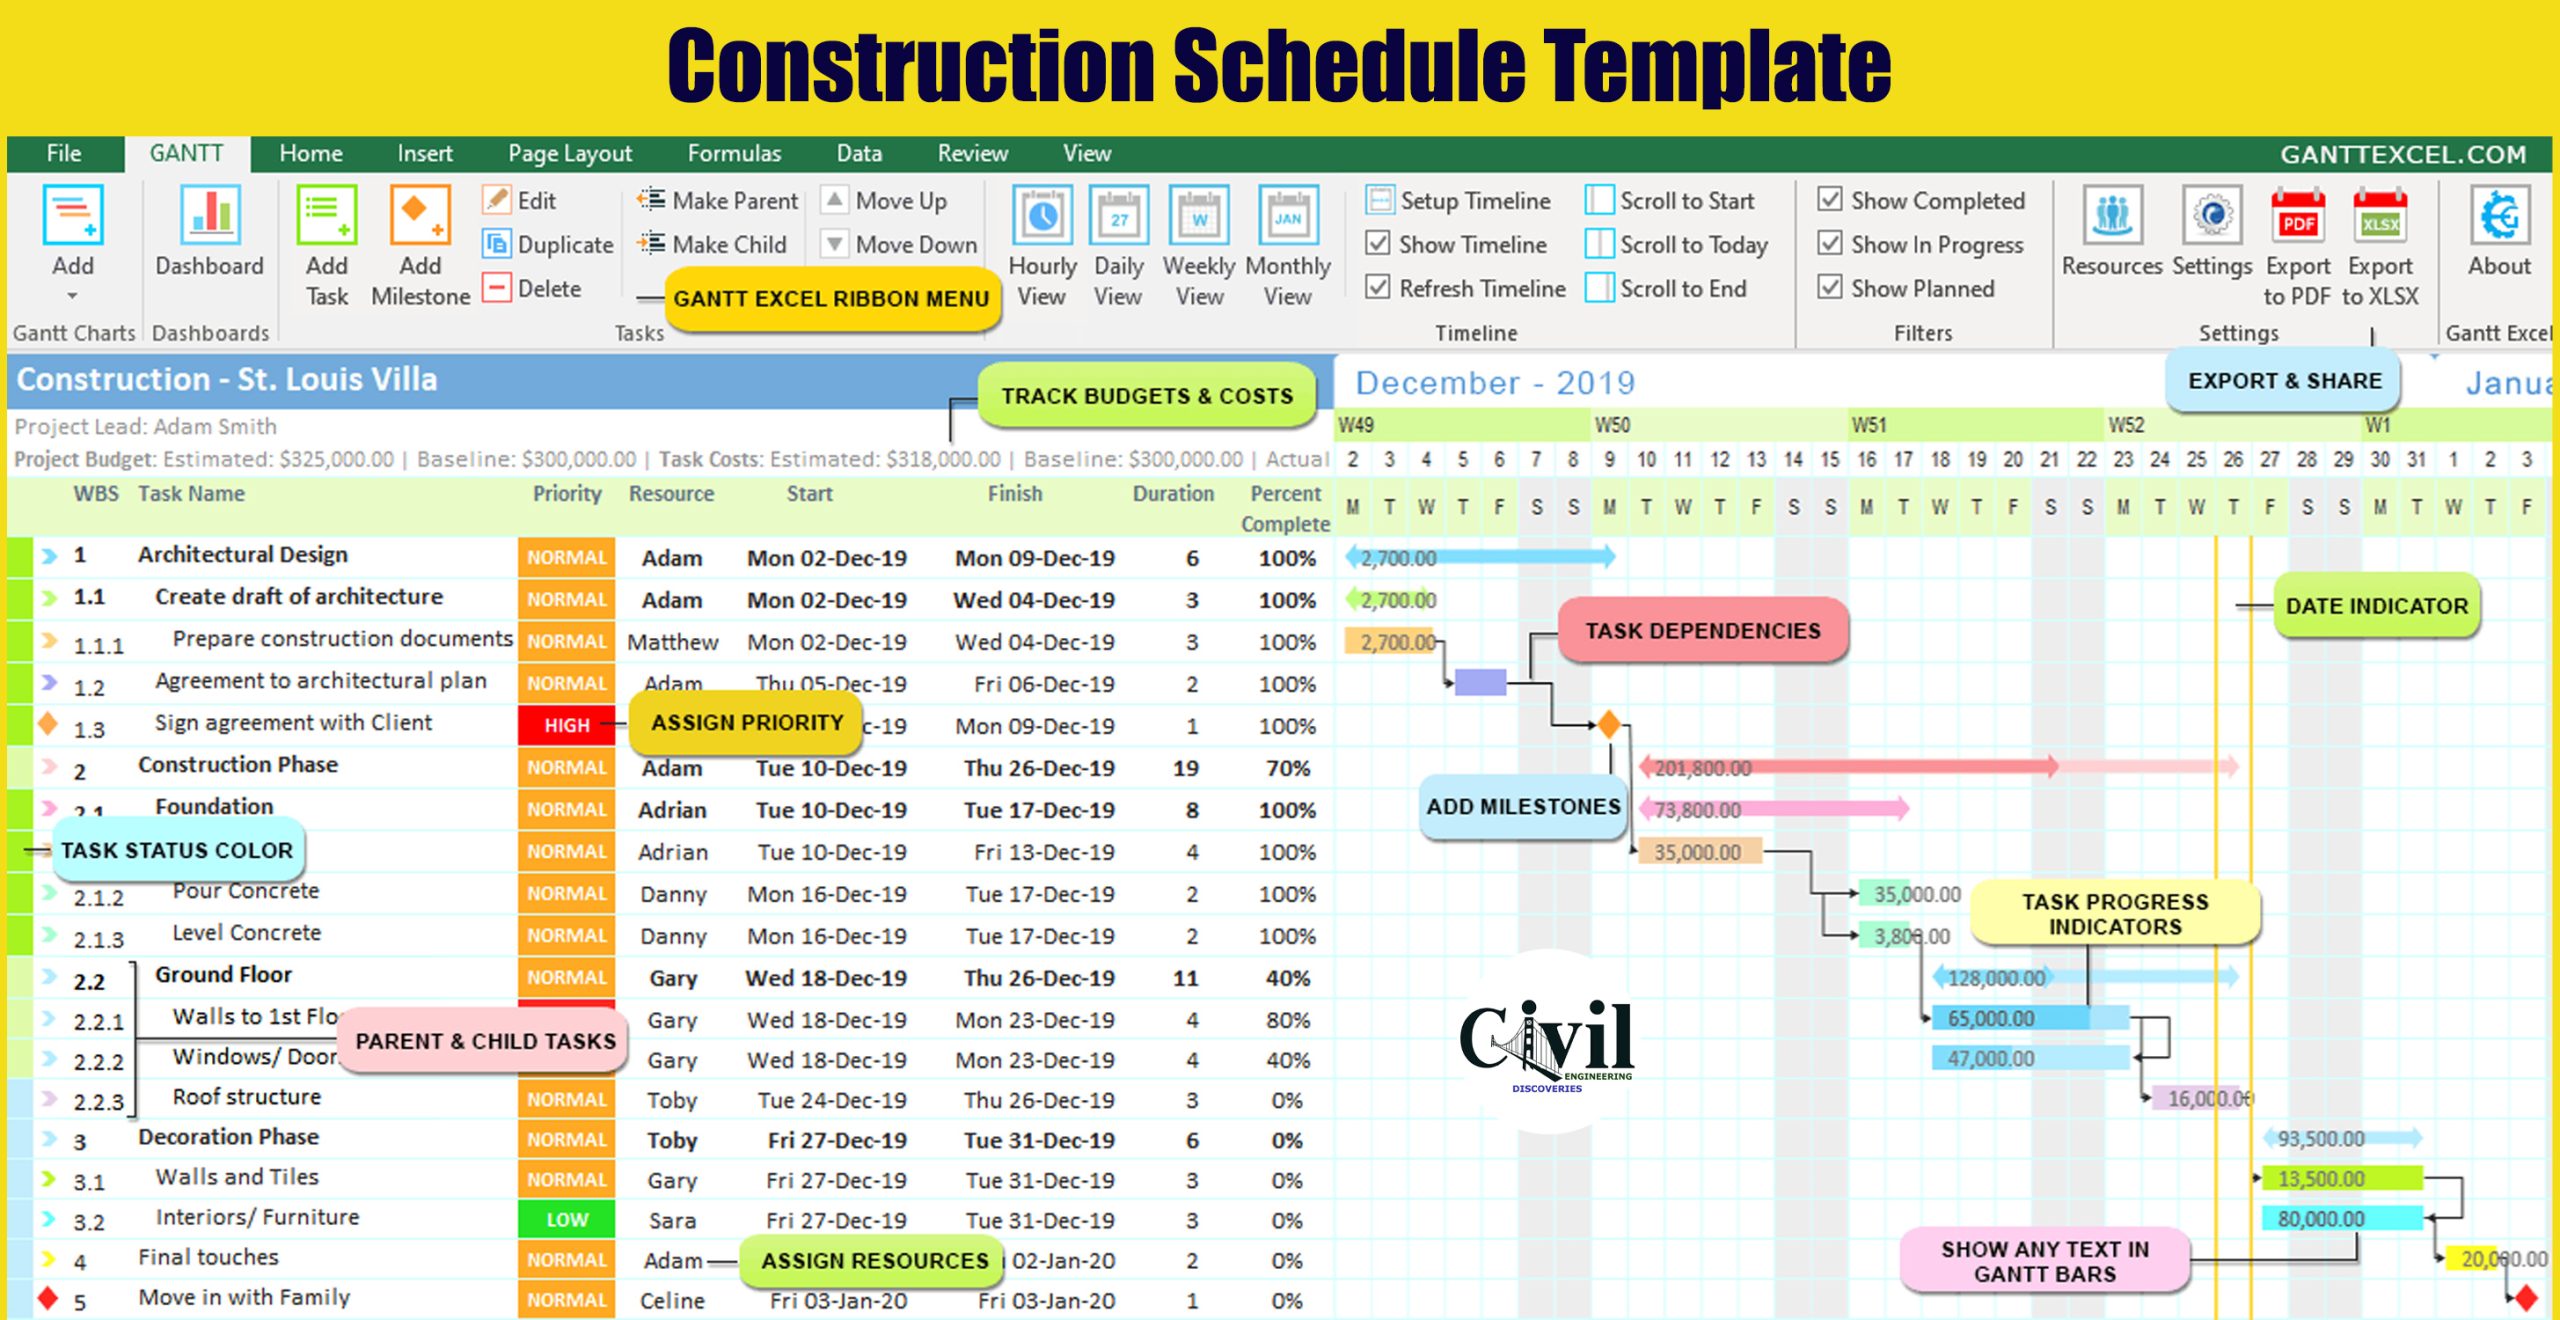 simple project management template excel free